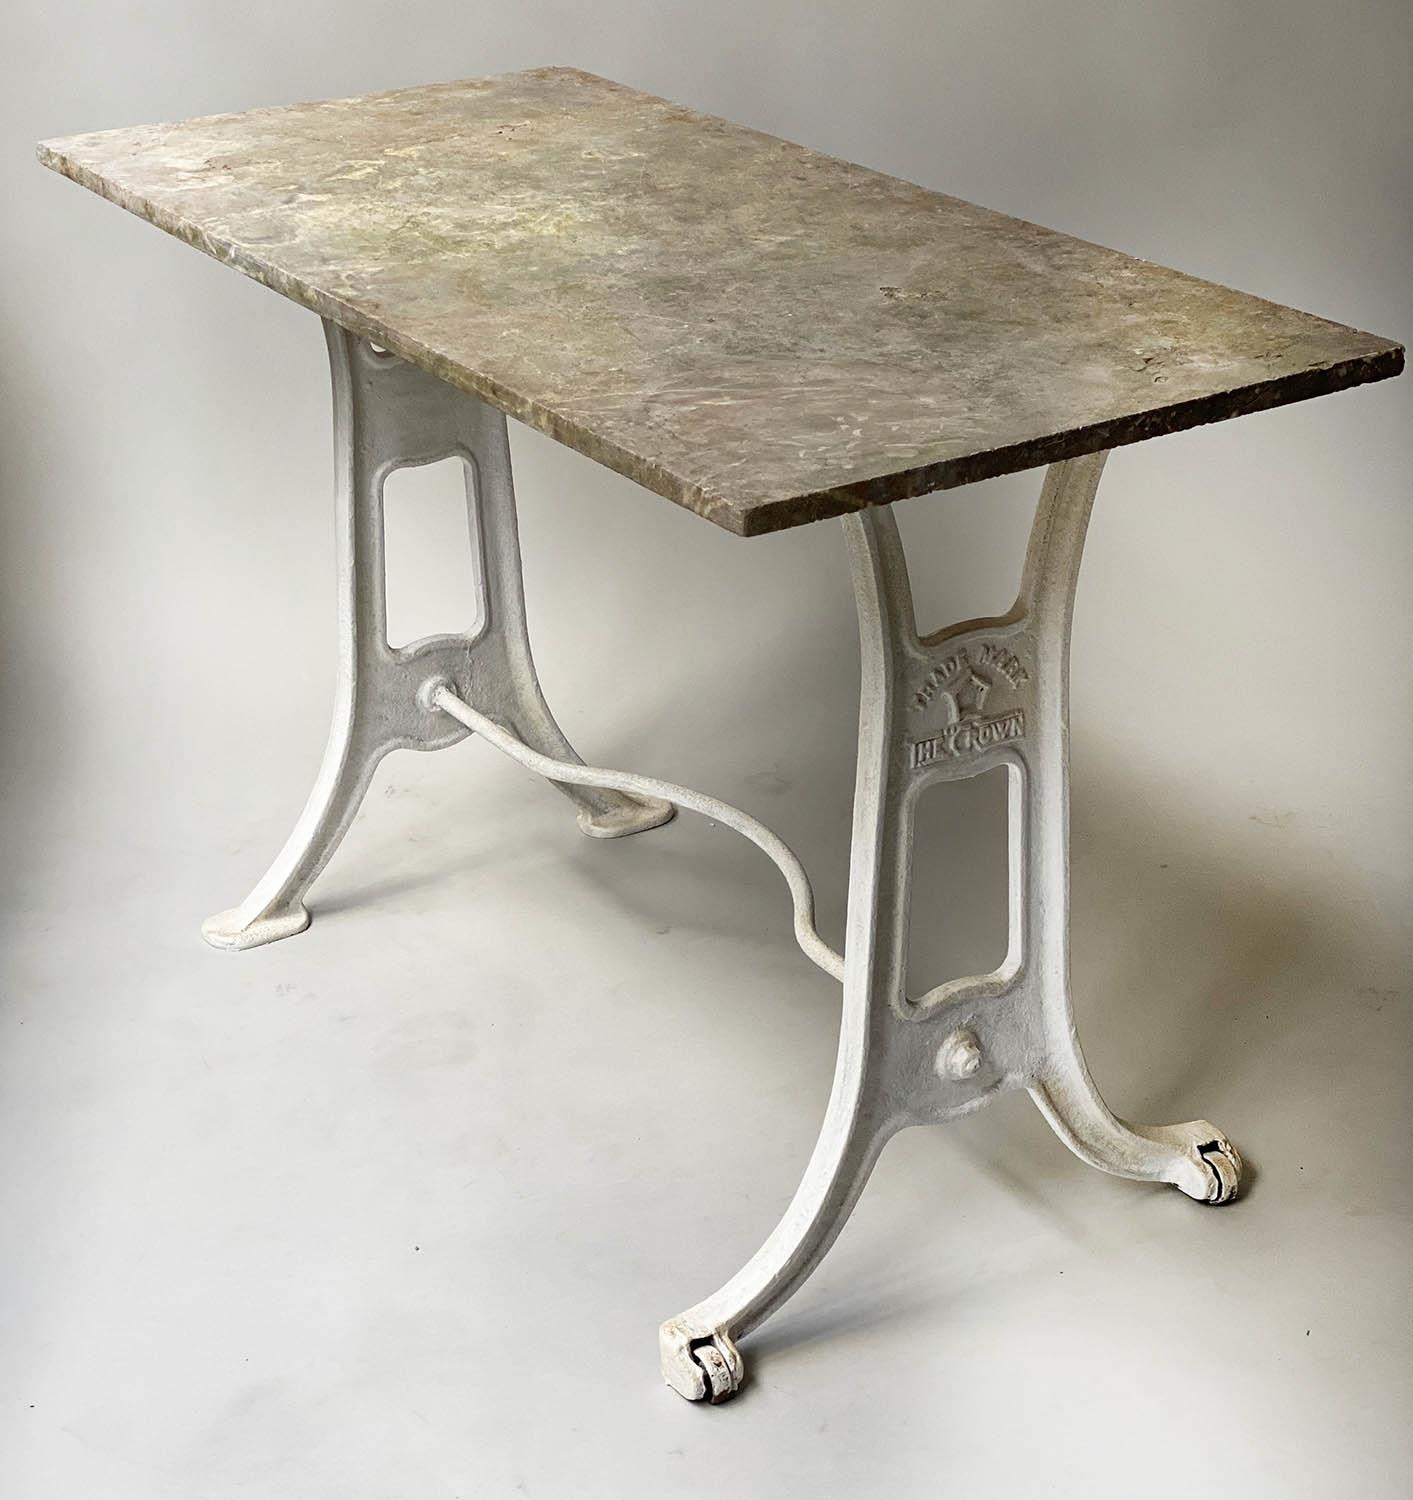 GARDEN TABLE, early 20th century rectangular variegated weathered marble on cast iron strechered - Image 5 of 5